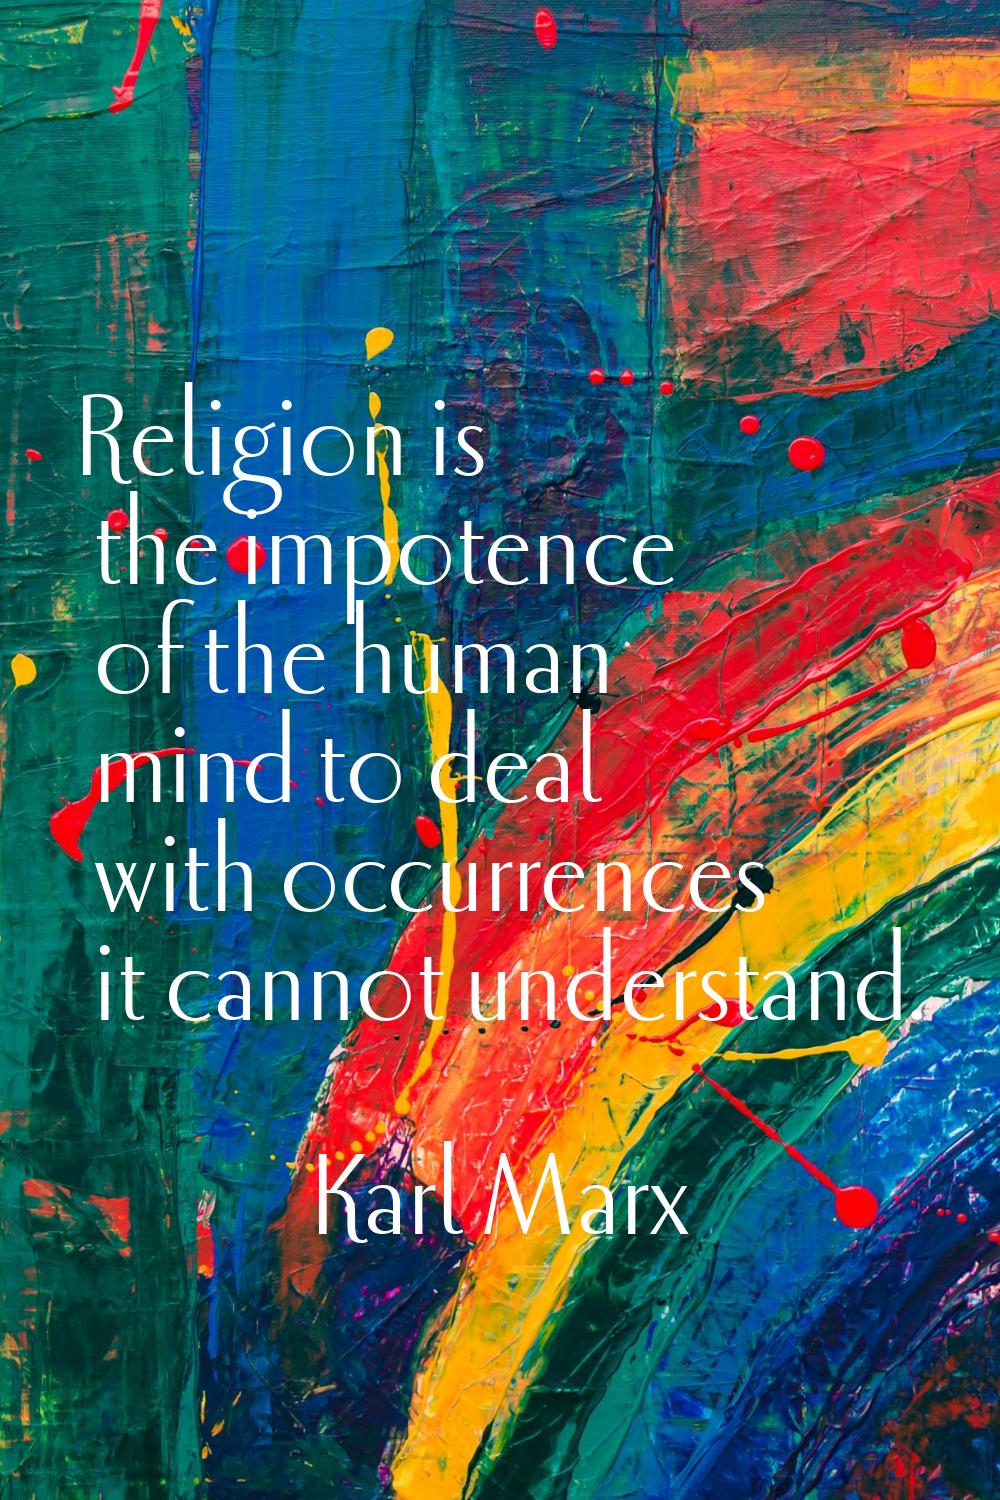 Religion is the impotence of the human mind to deal with occurrences it cannot understand.